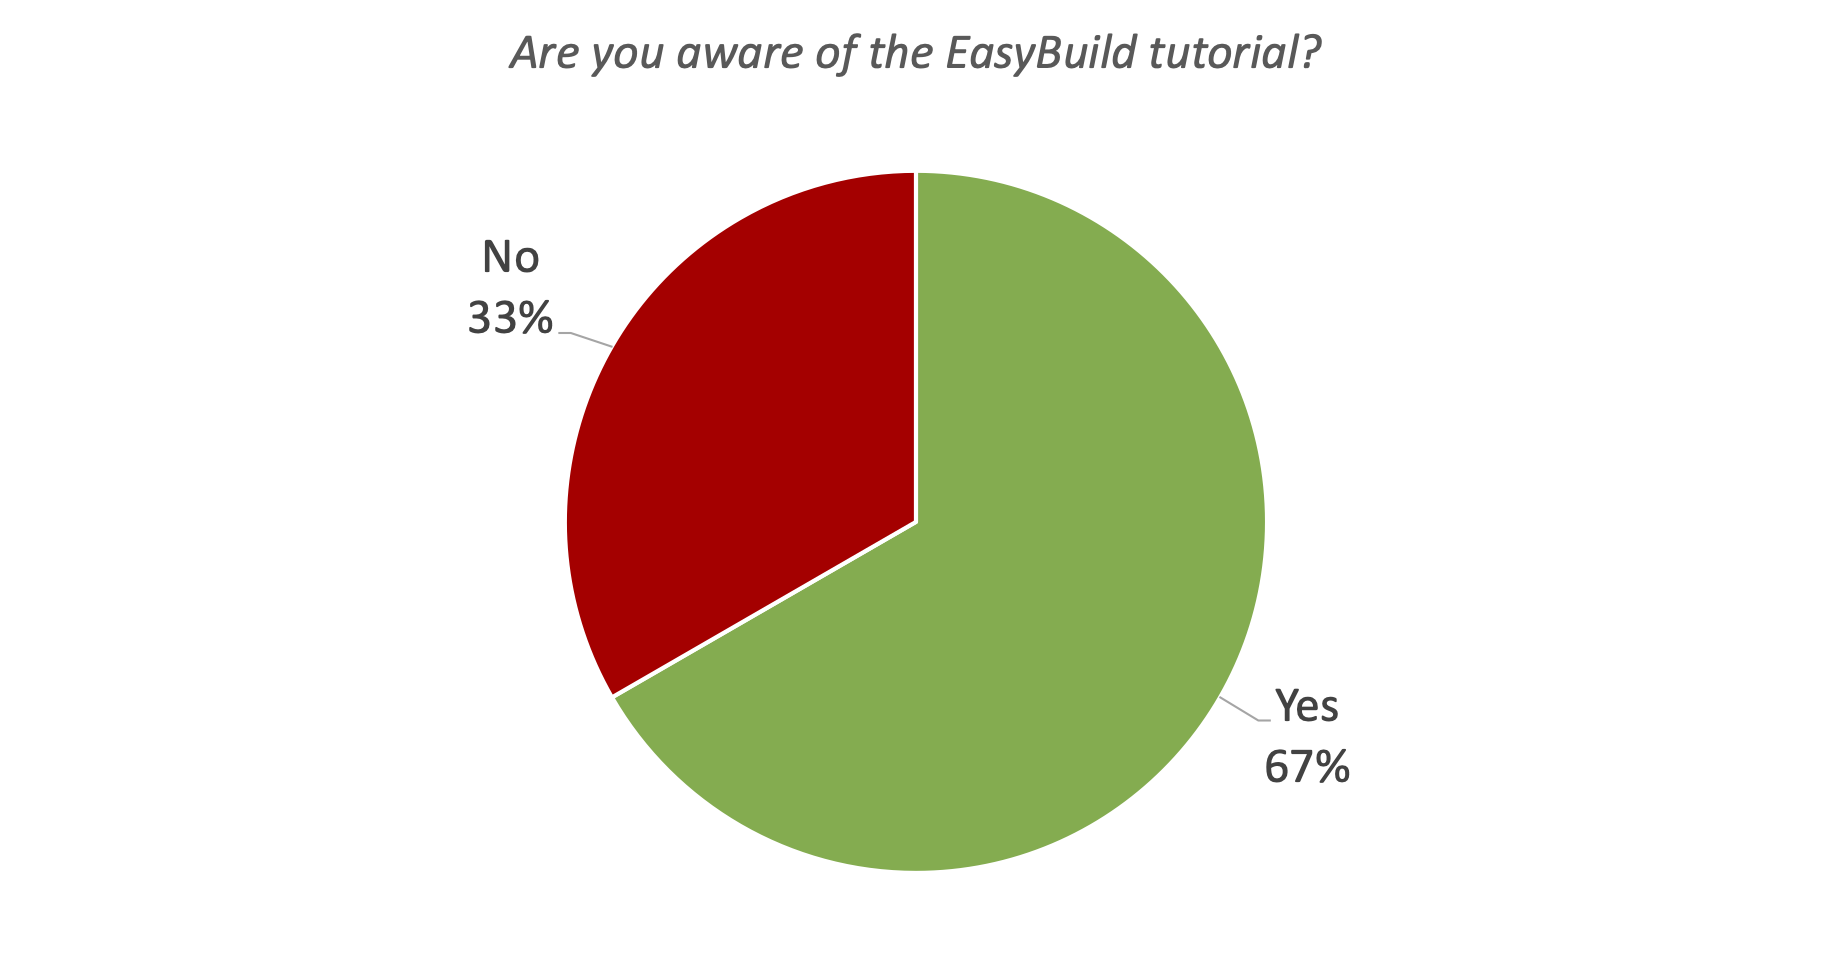 39. Are you aware of the EasyBuild tutorial?